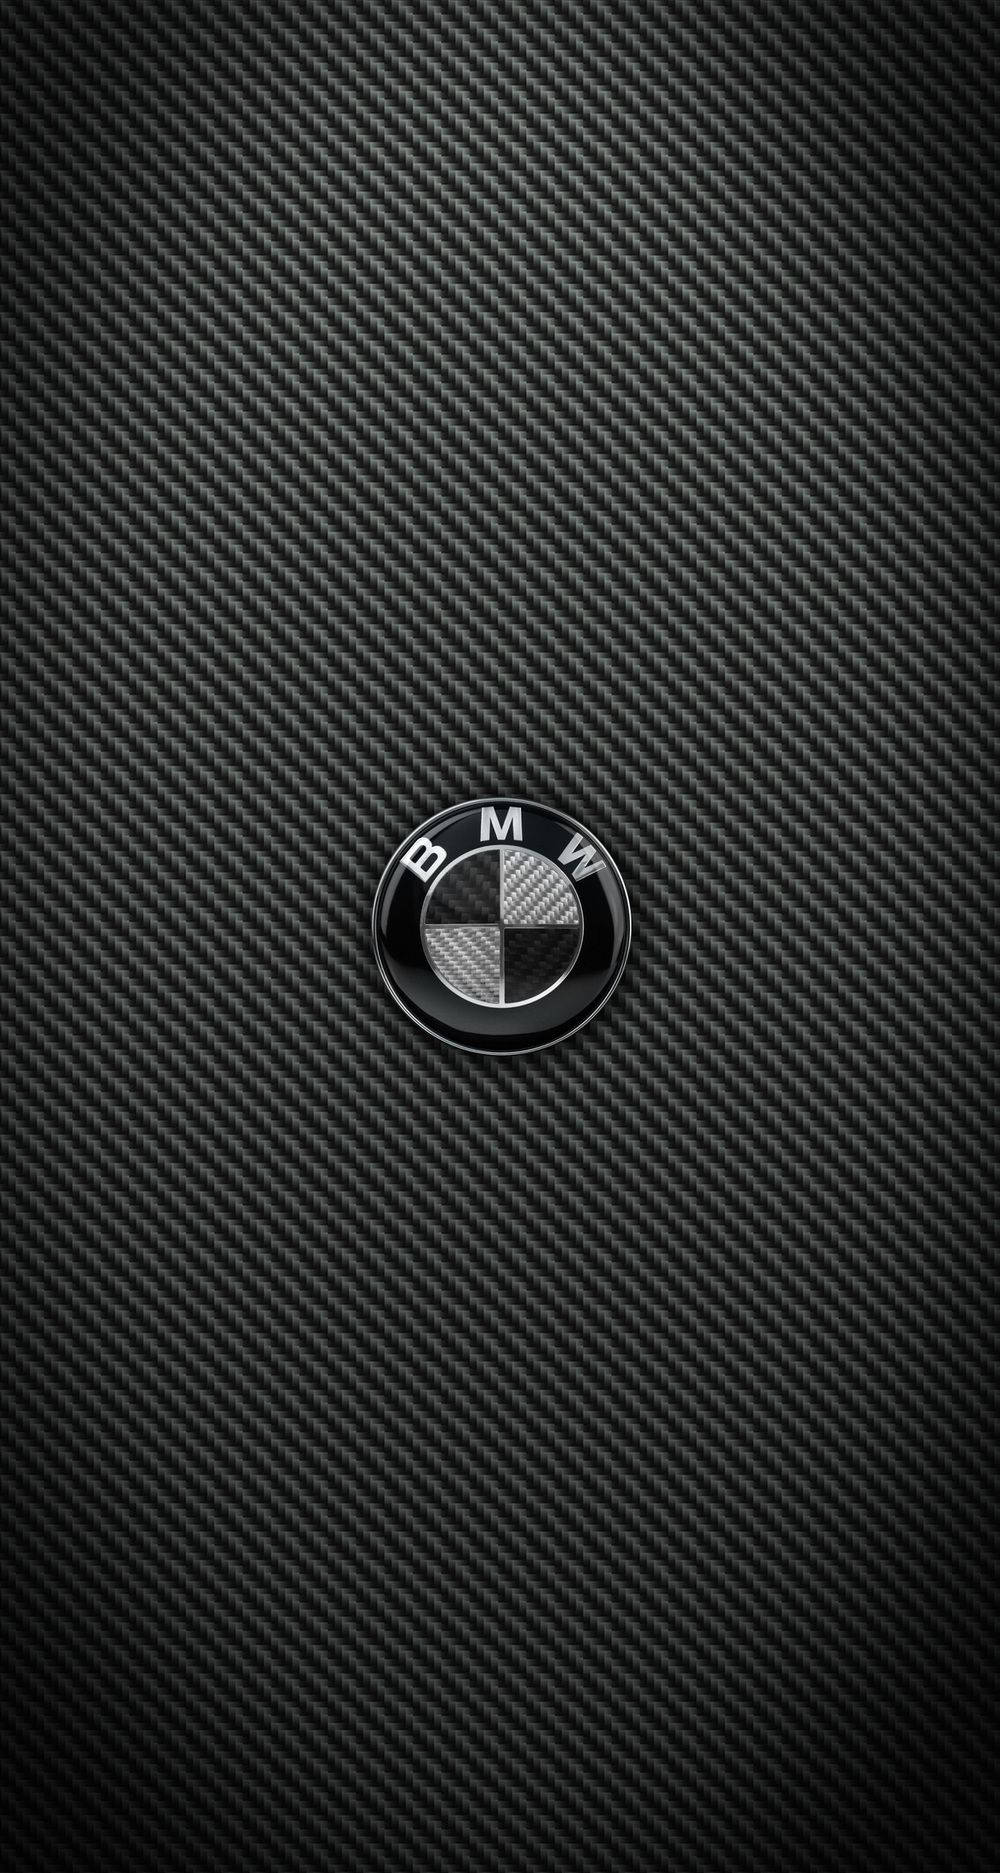 Carbon Fiber 1000X1873 Wallpaper and Background Image